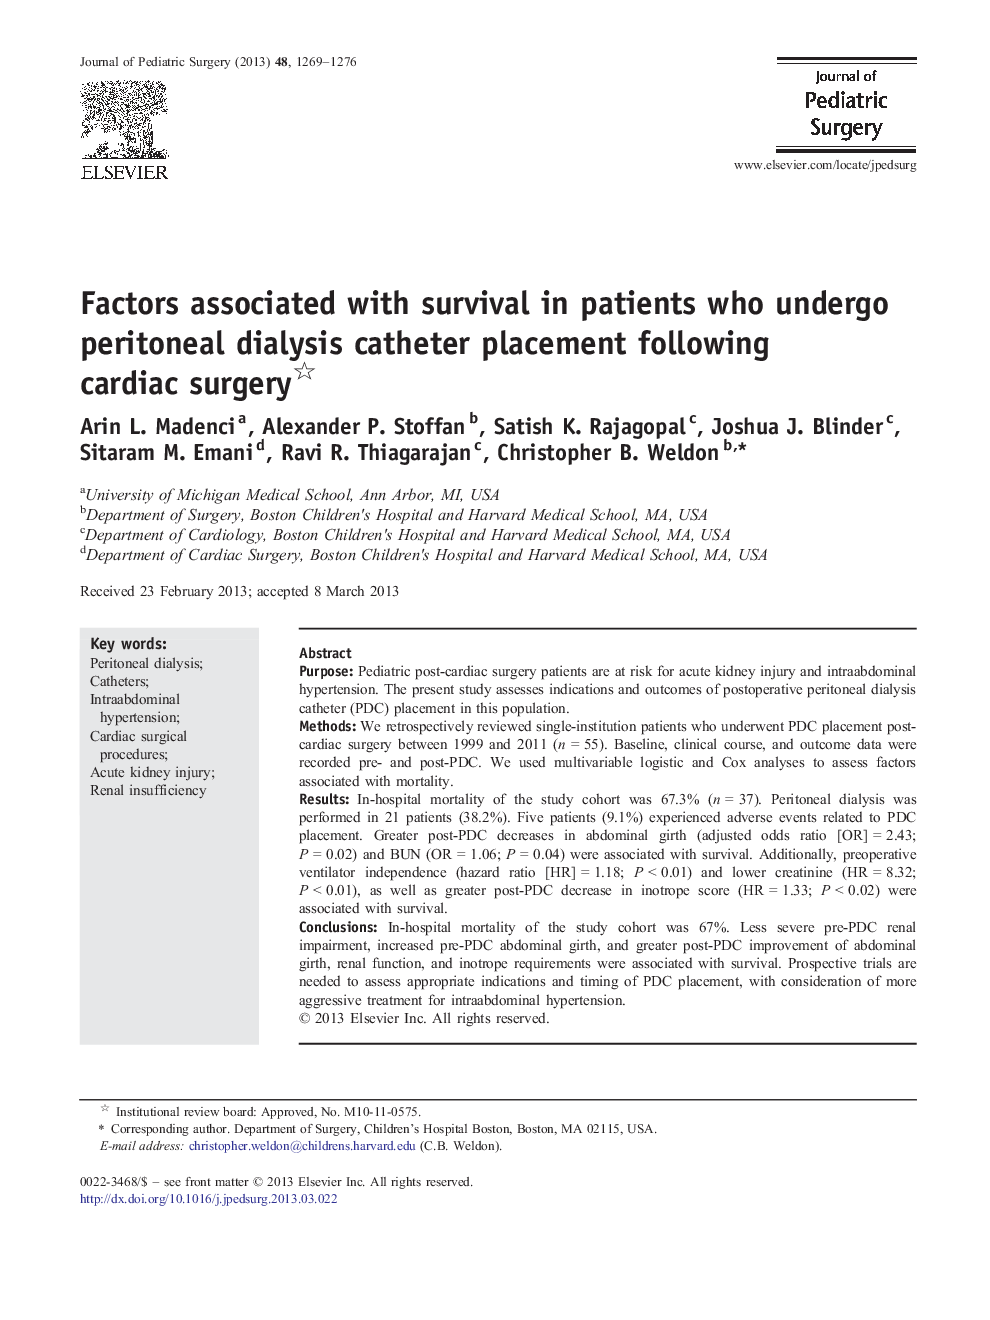 Factors associated with survival in patients who undergo peritoneal dialysis catheter placement following cardiac surgery 